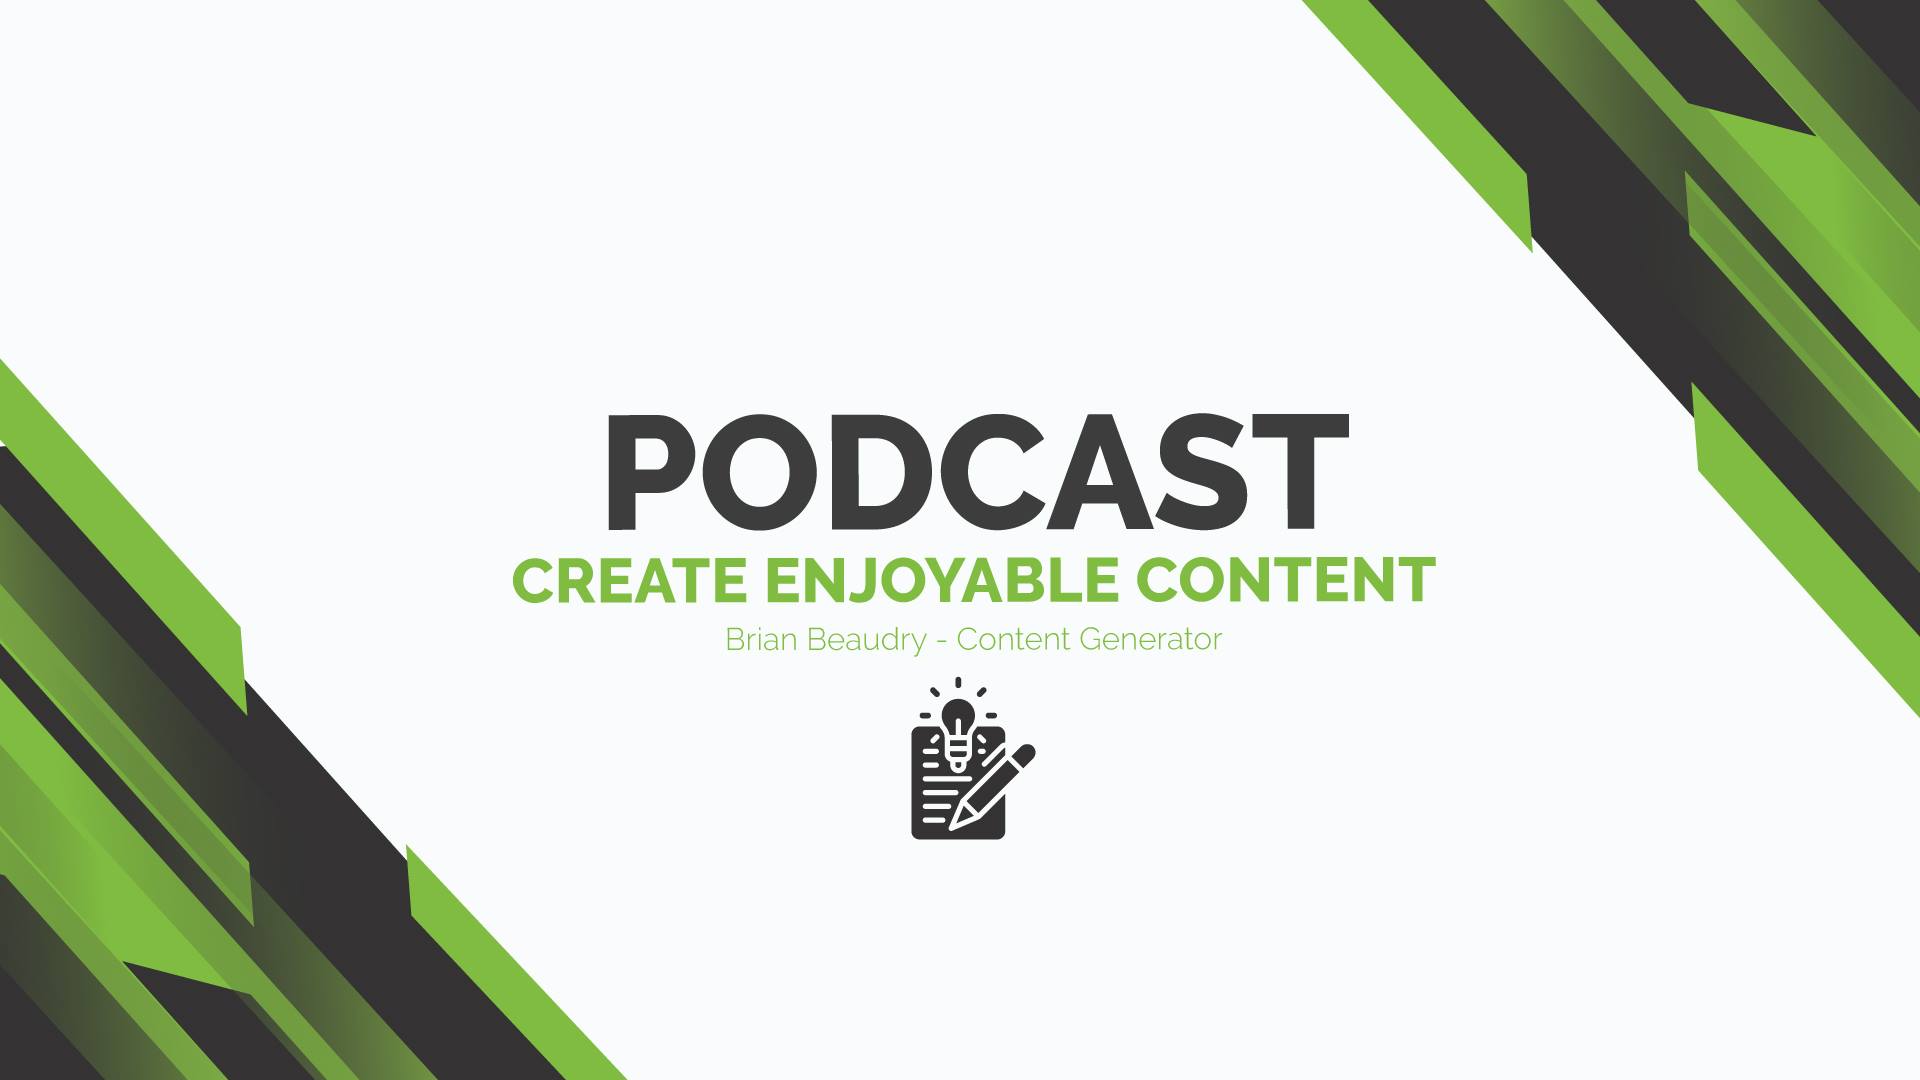 Create Enjoyable Content Podcast text